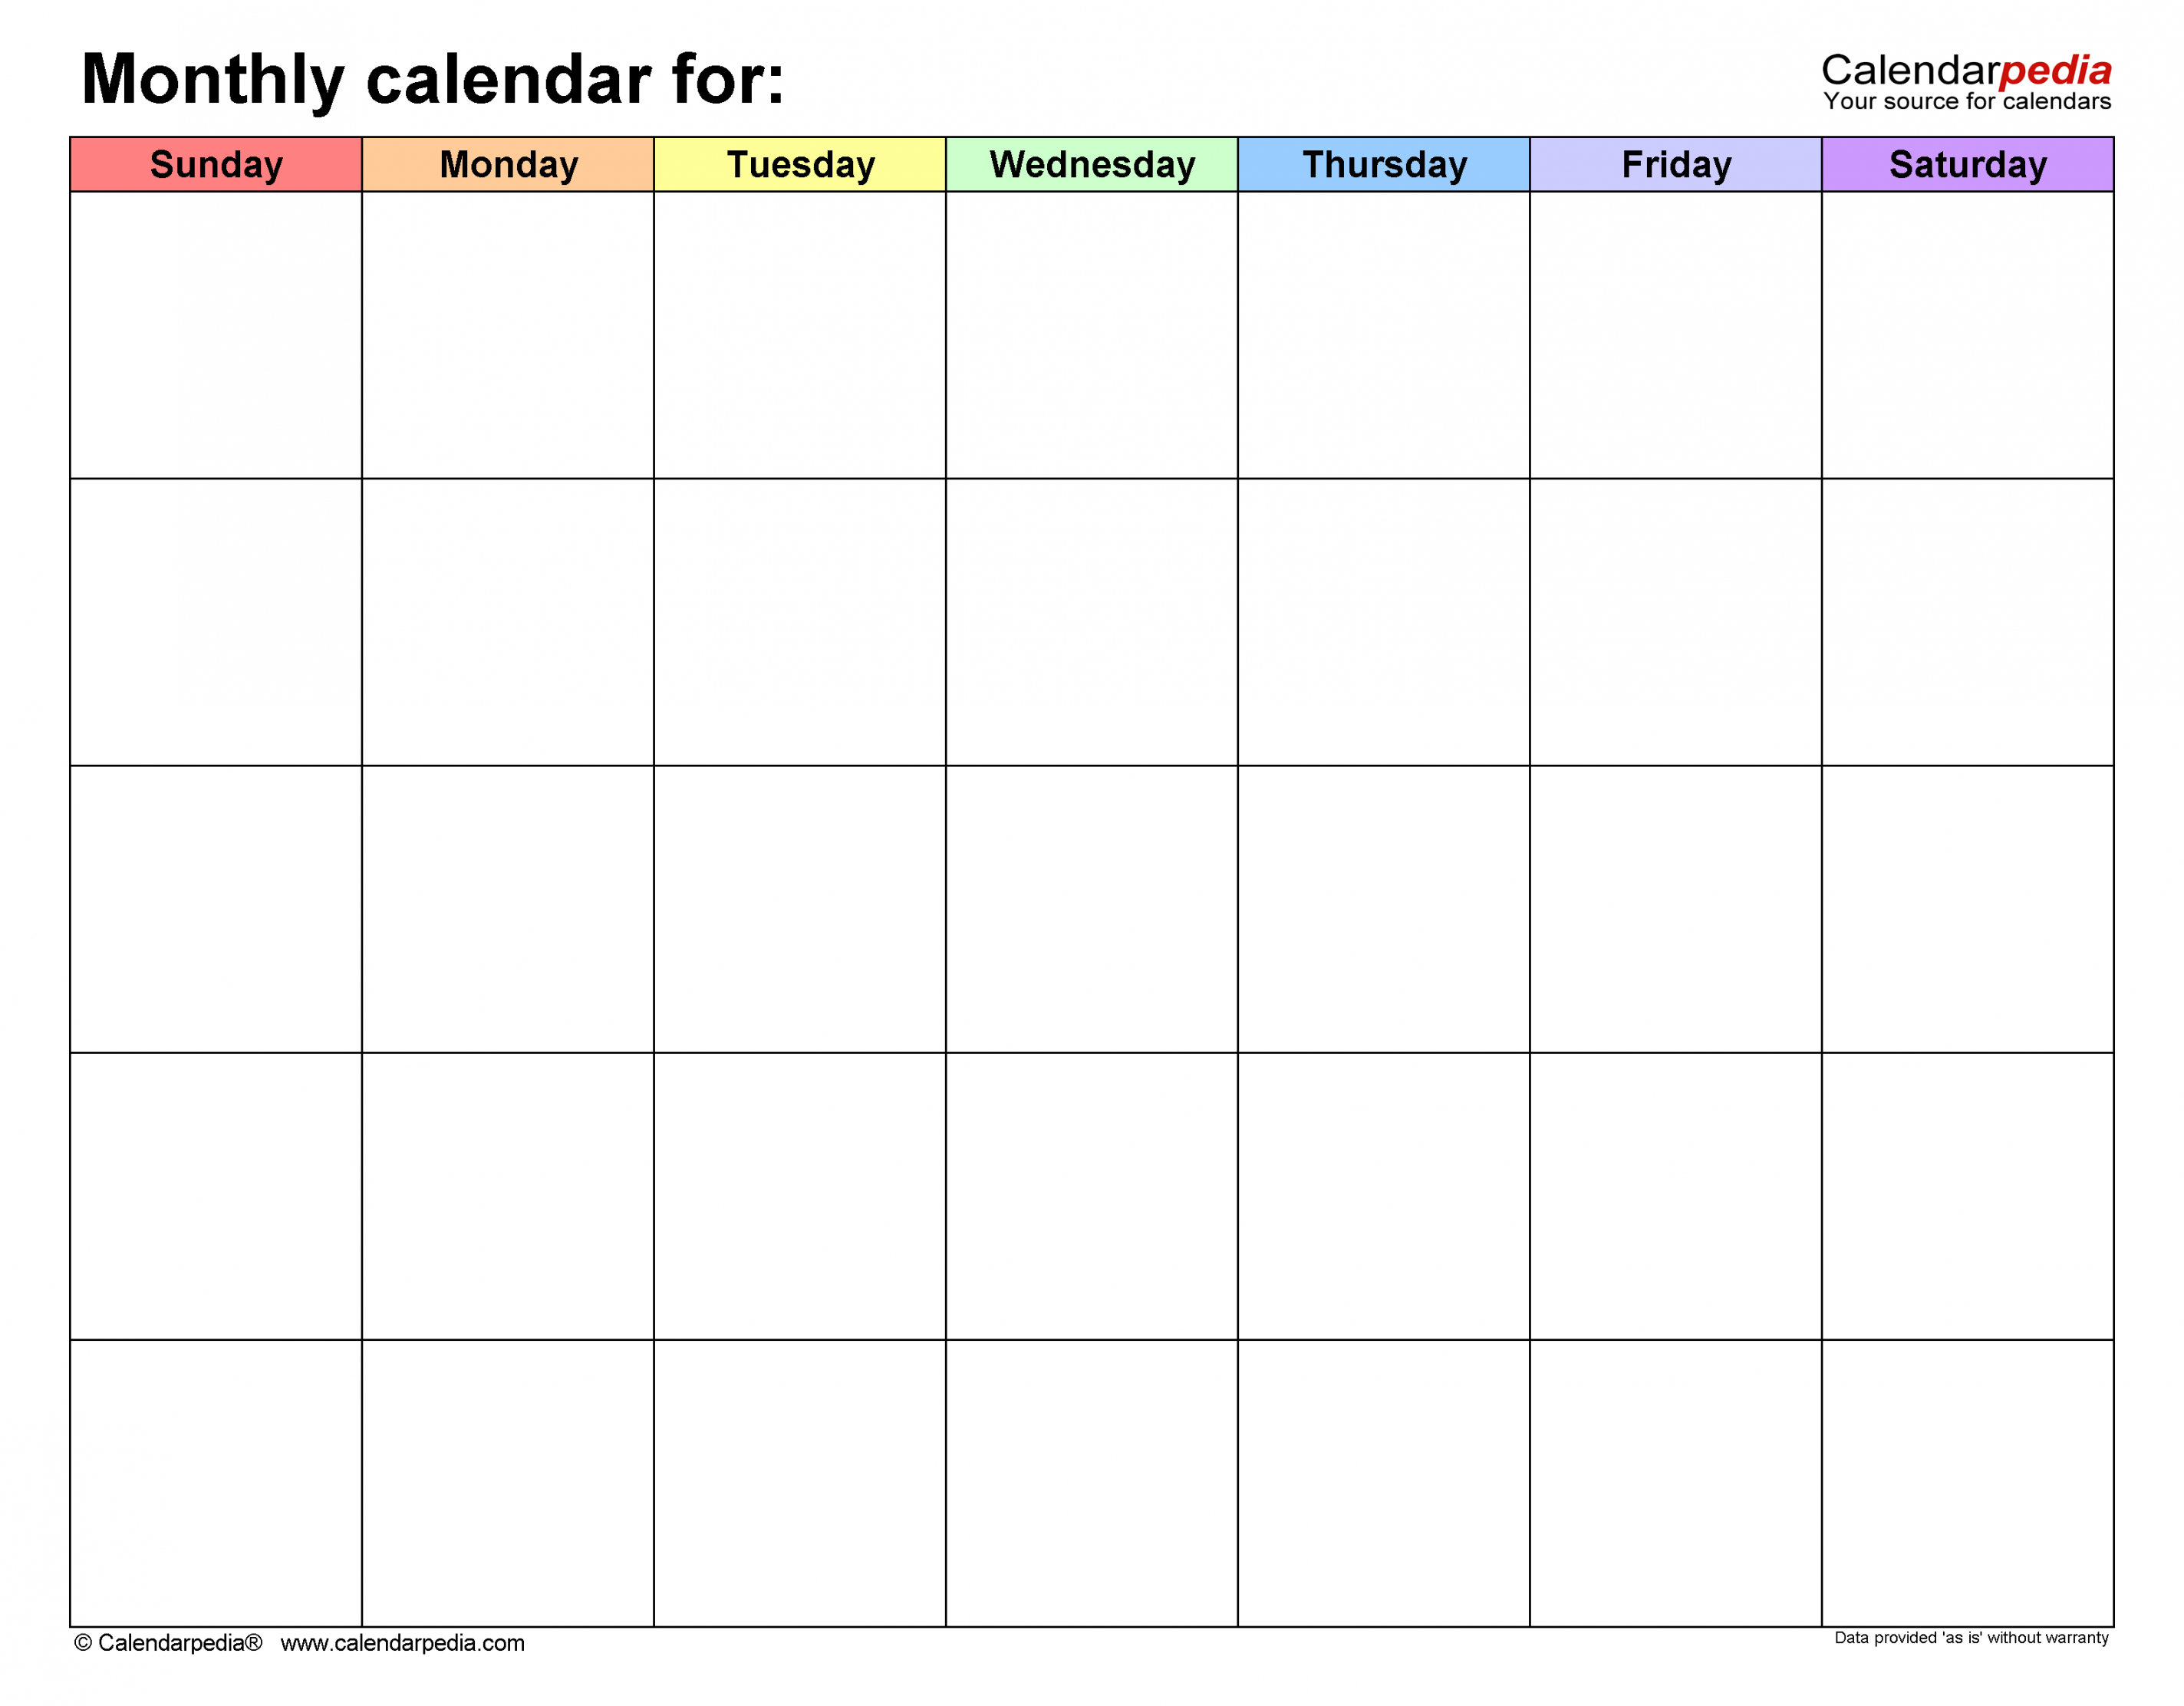 Free Monthly Calendars in PDF Format -  Templates